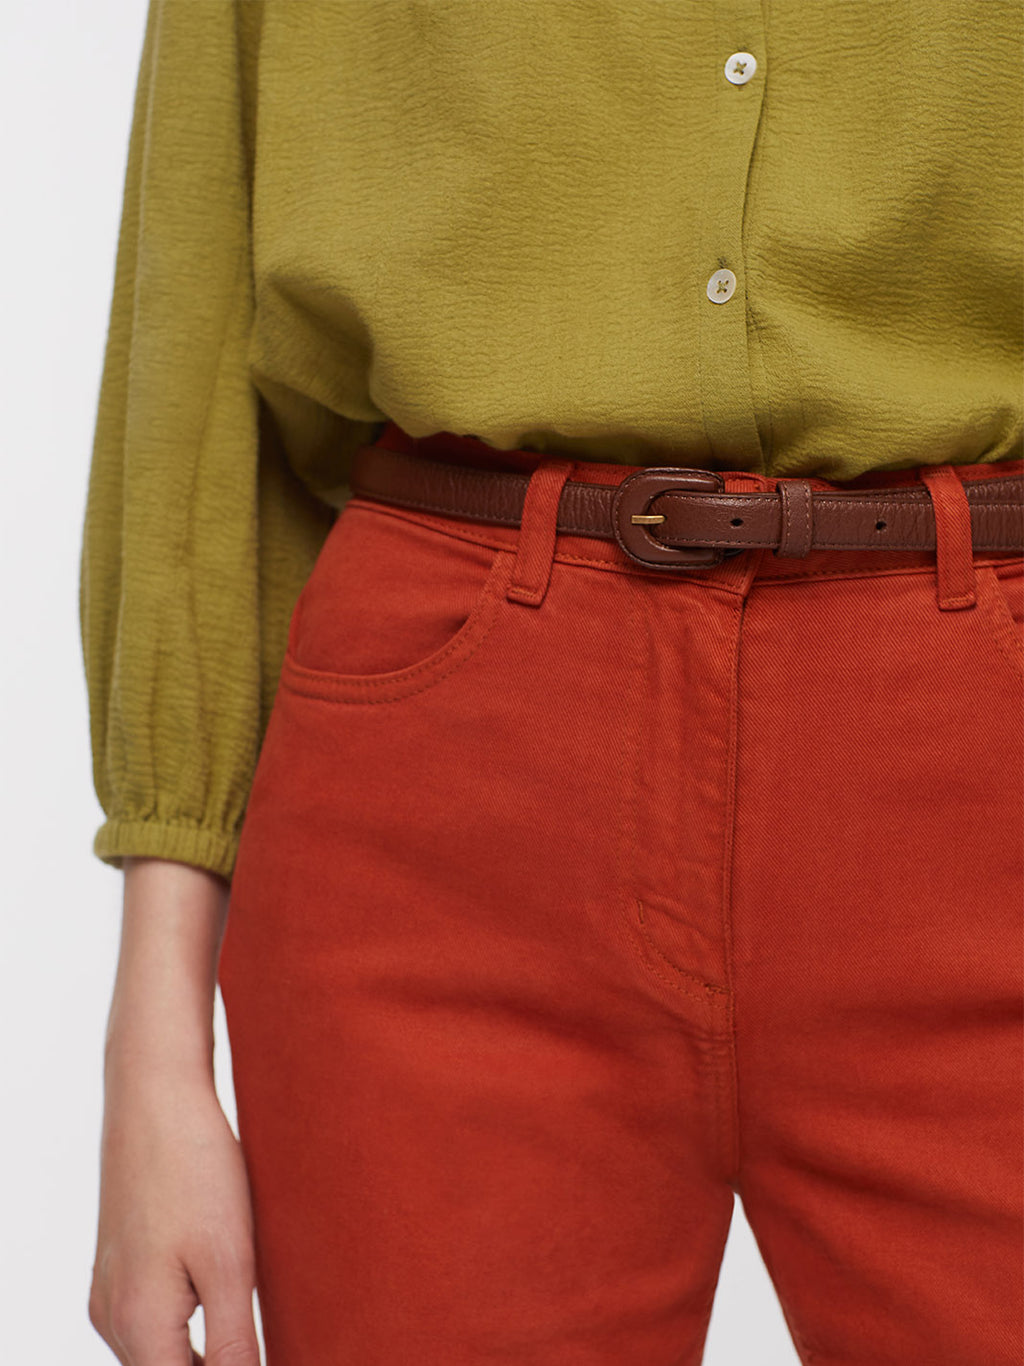 Leather Belt with Buckle Lined in Olive, Brown or Creme